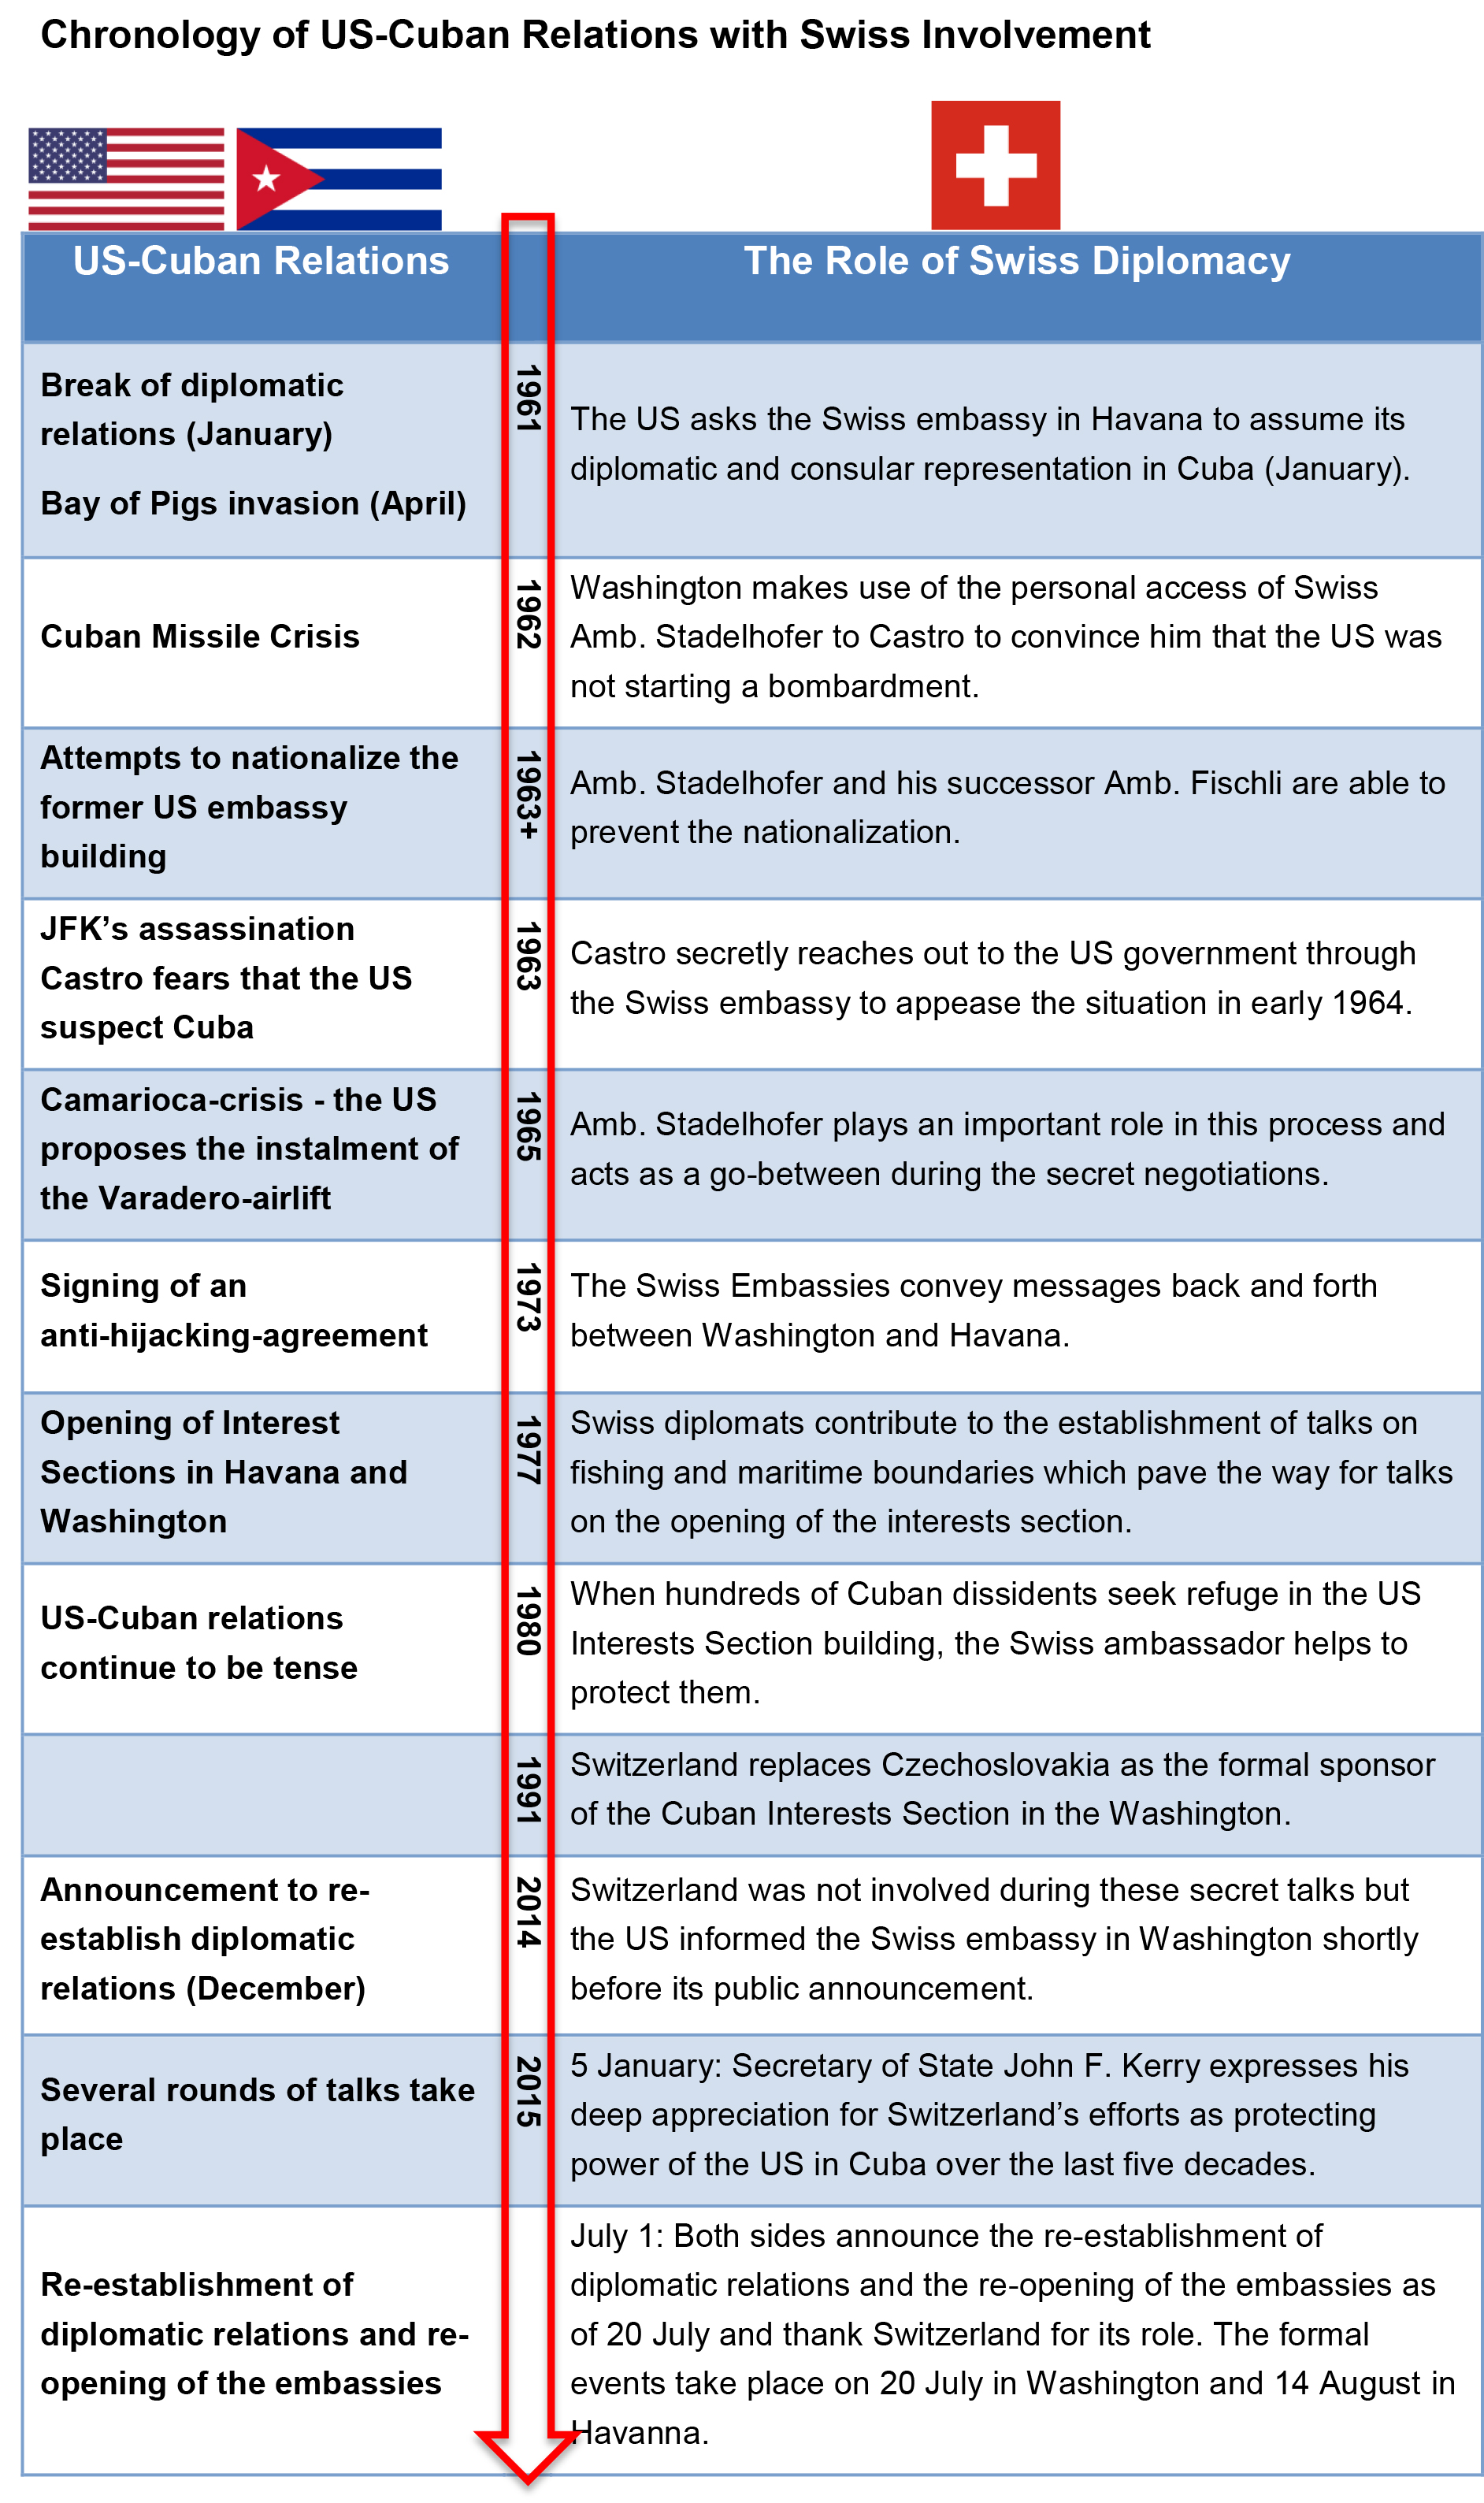 Chronology of US-Cuban Relations with Swiss Involvement